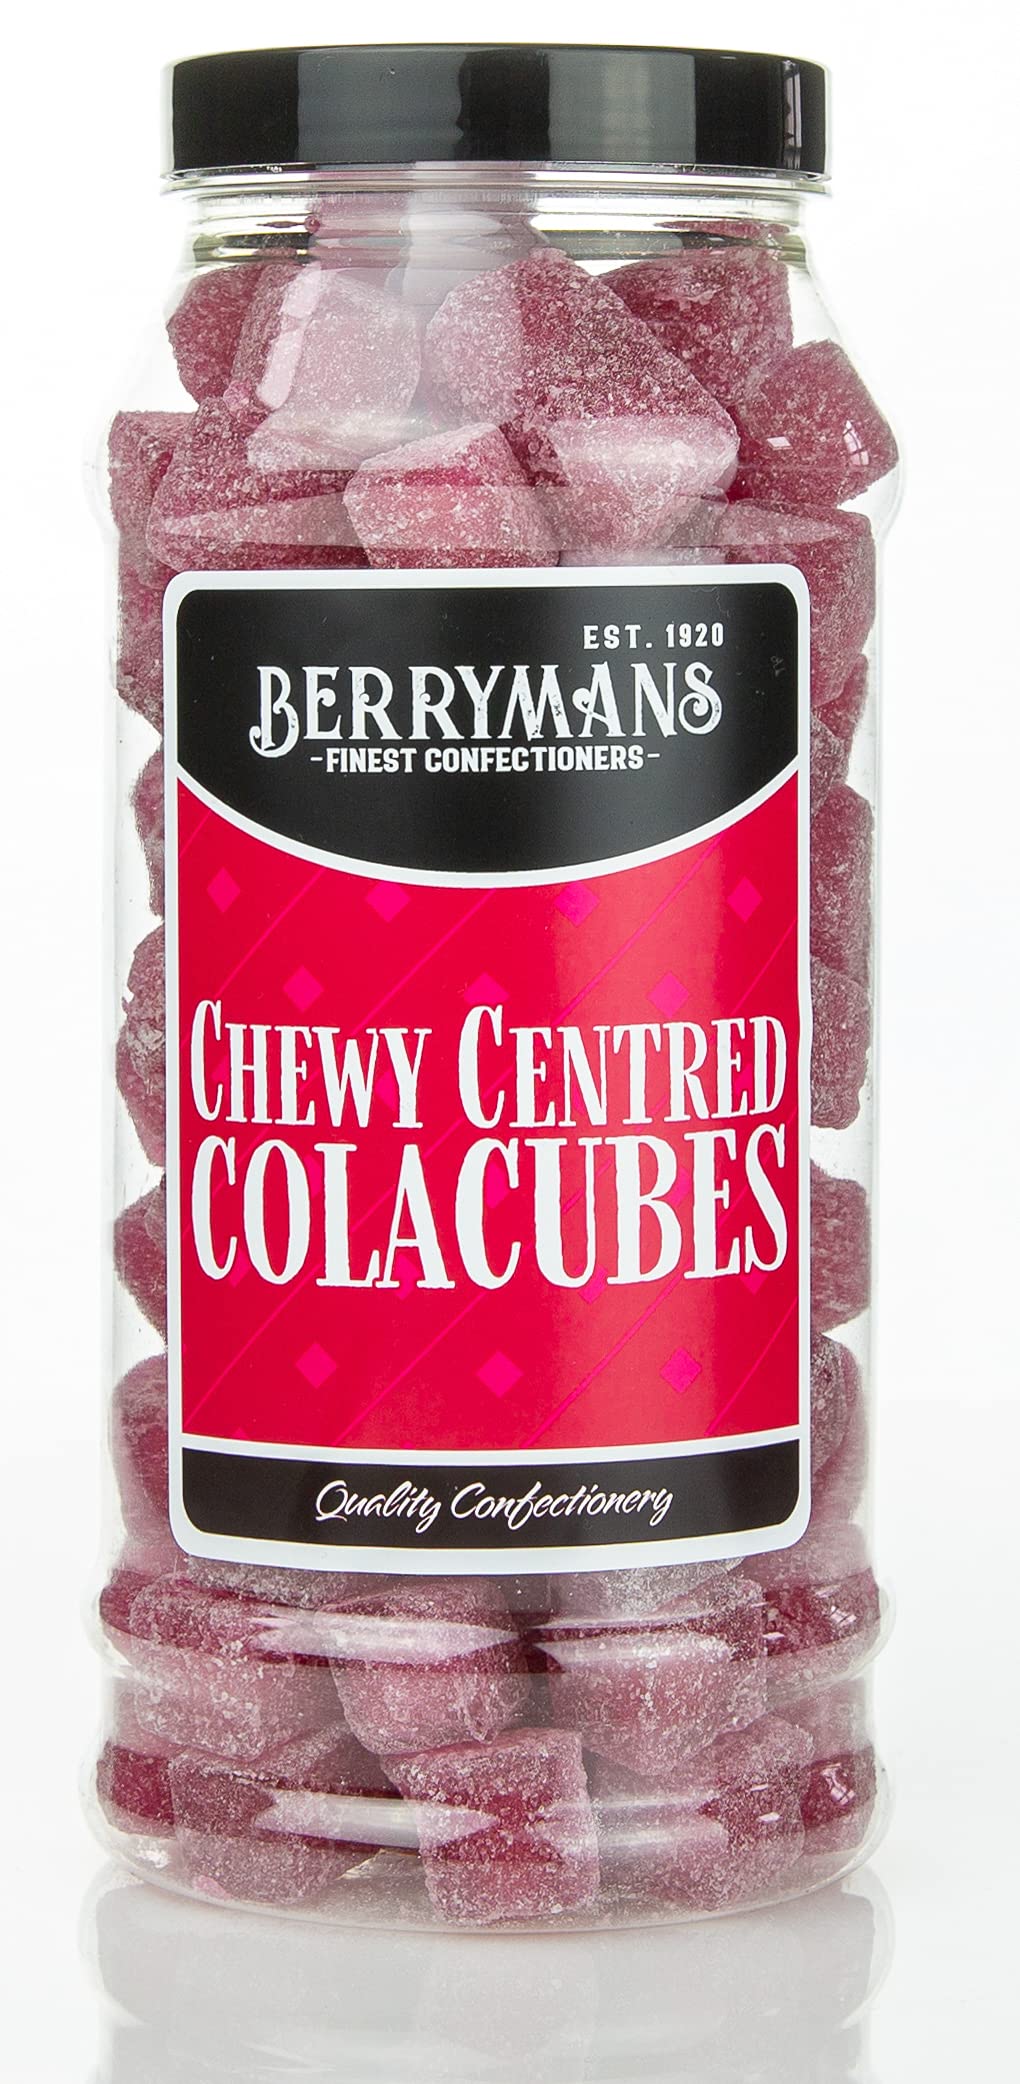 Original Chewy Centred Cola Cubes Boiled Retro Sweets Gift Jar by Berrymans Sweet Shop - Classic Sweets, Traditional Taste.